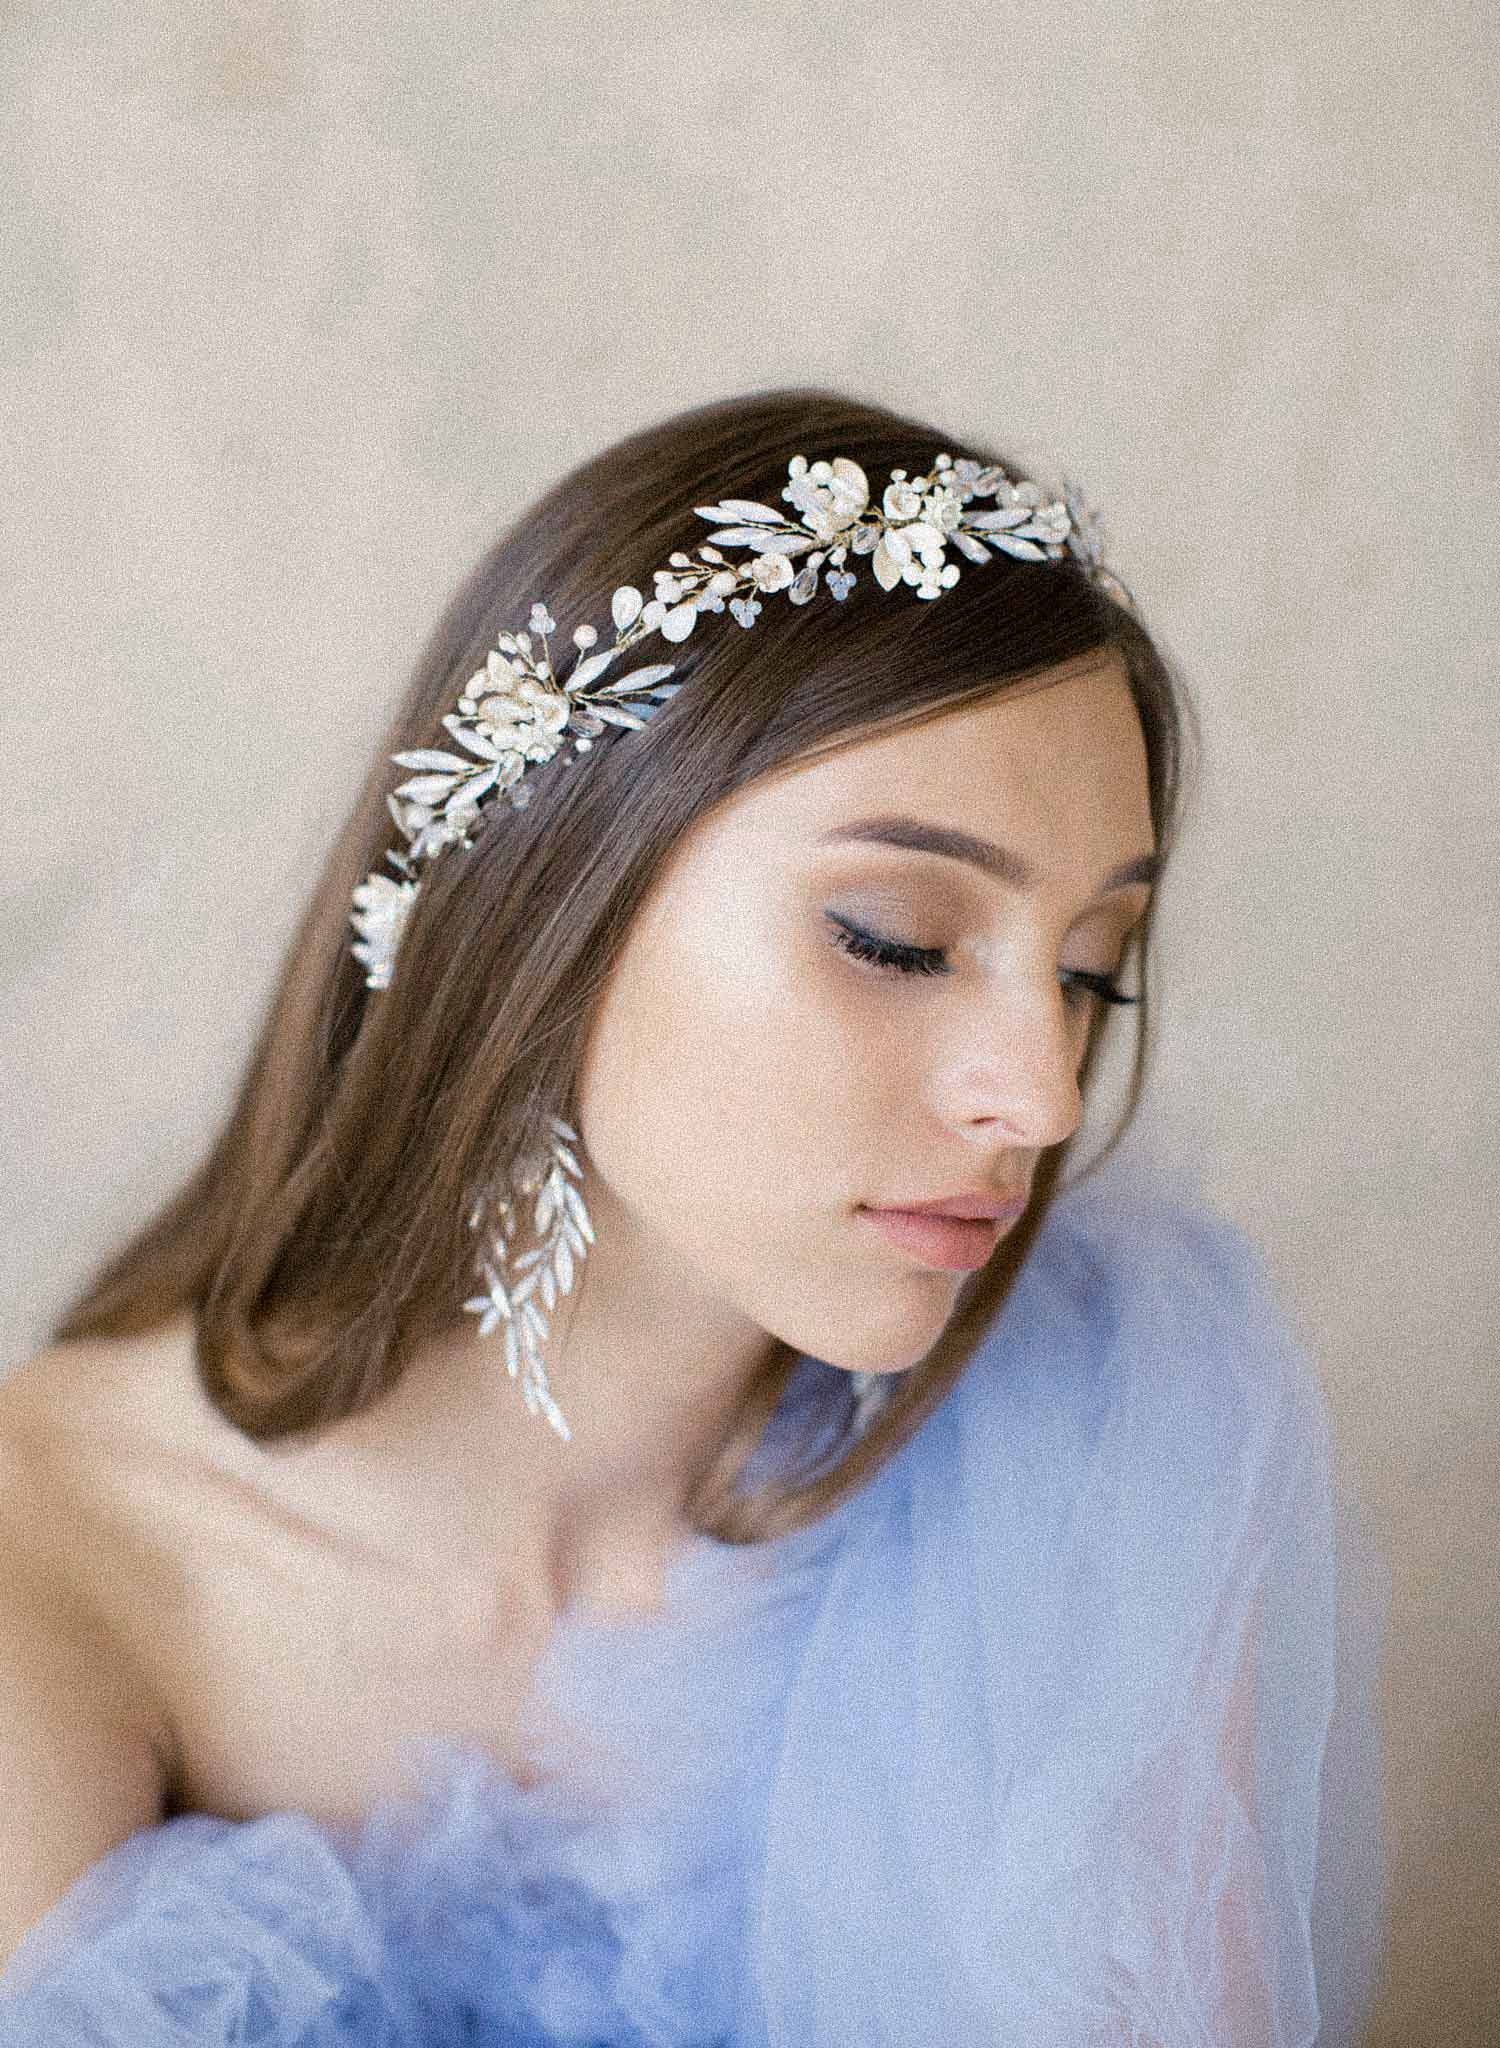 Twigs & Honey Bridal Floral Handmade Clay Hairpins - Pearlescent Blossom Bridal Hair Pin Set of 2 - Style #2175